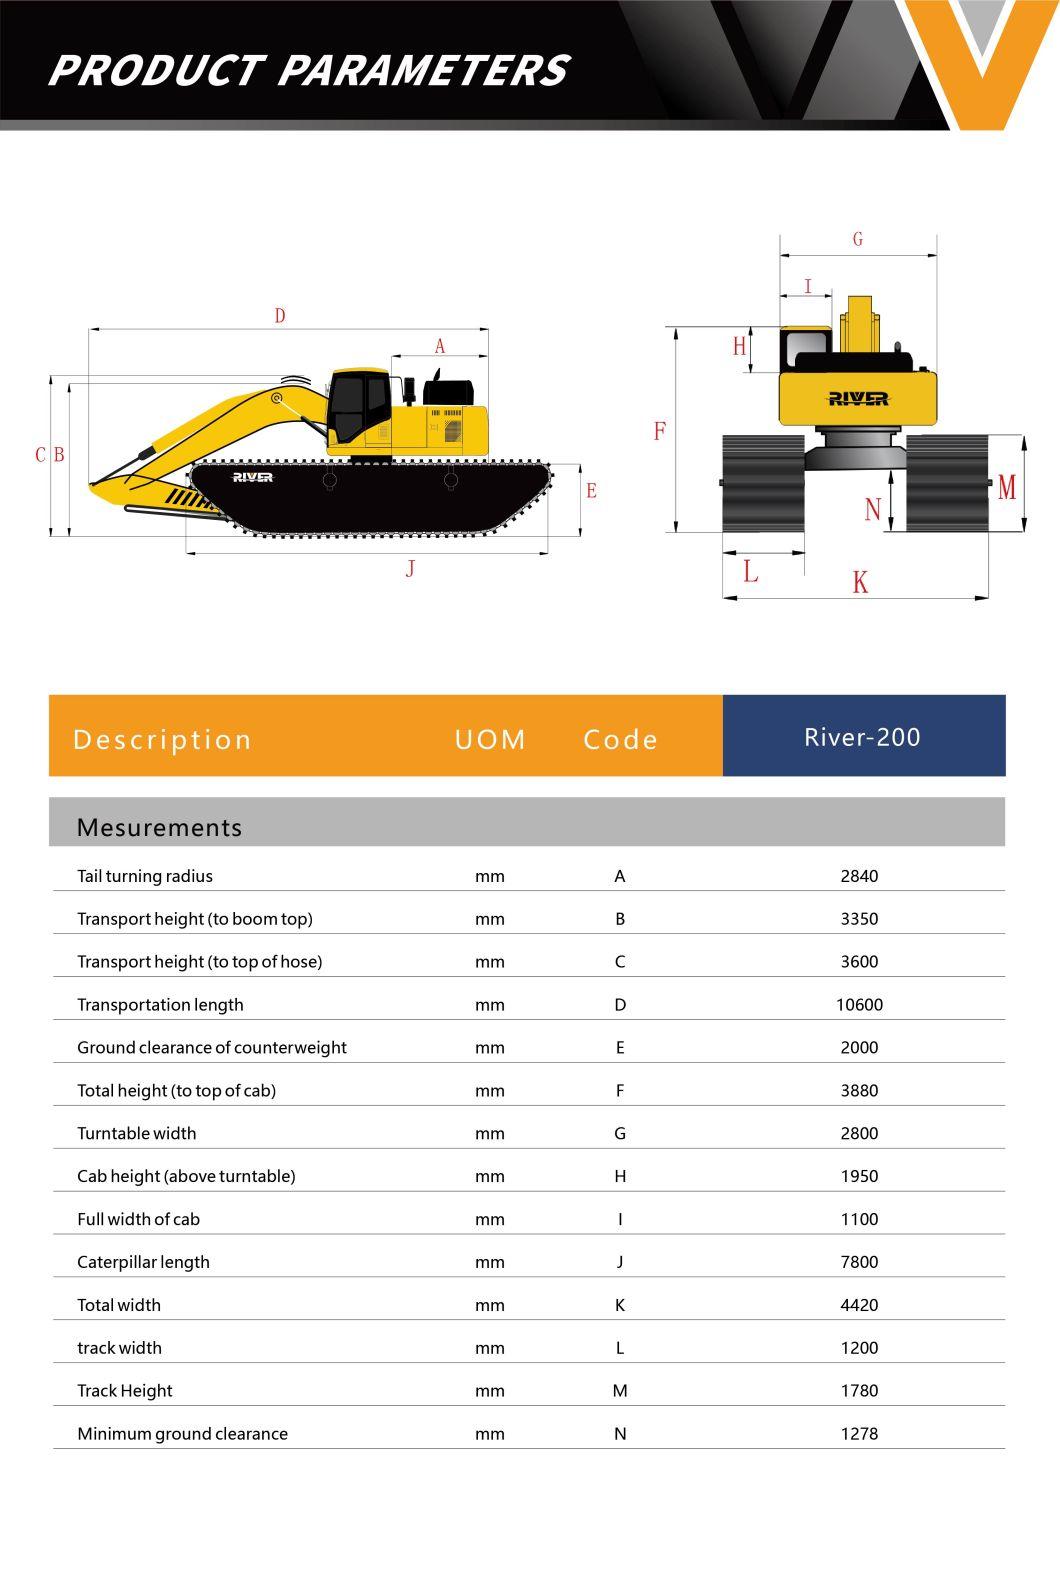 Trade Assurance High Quality Second Hand Cat 320c Amphibious Floating Pontoon Excavator with New Pontoon Undercarriage for River Cleaning